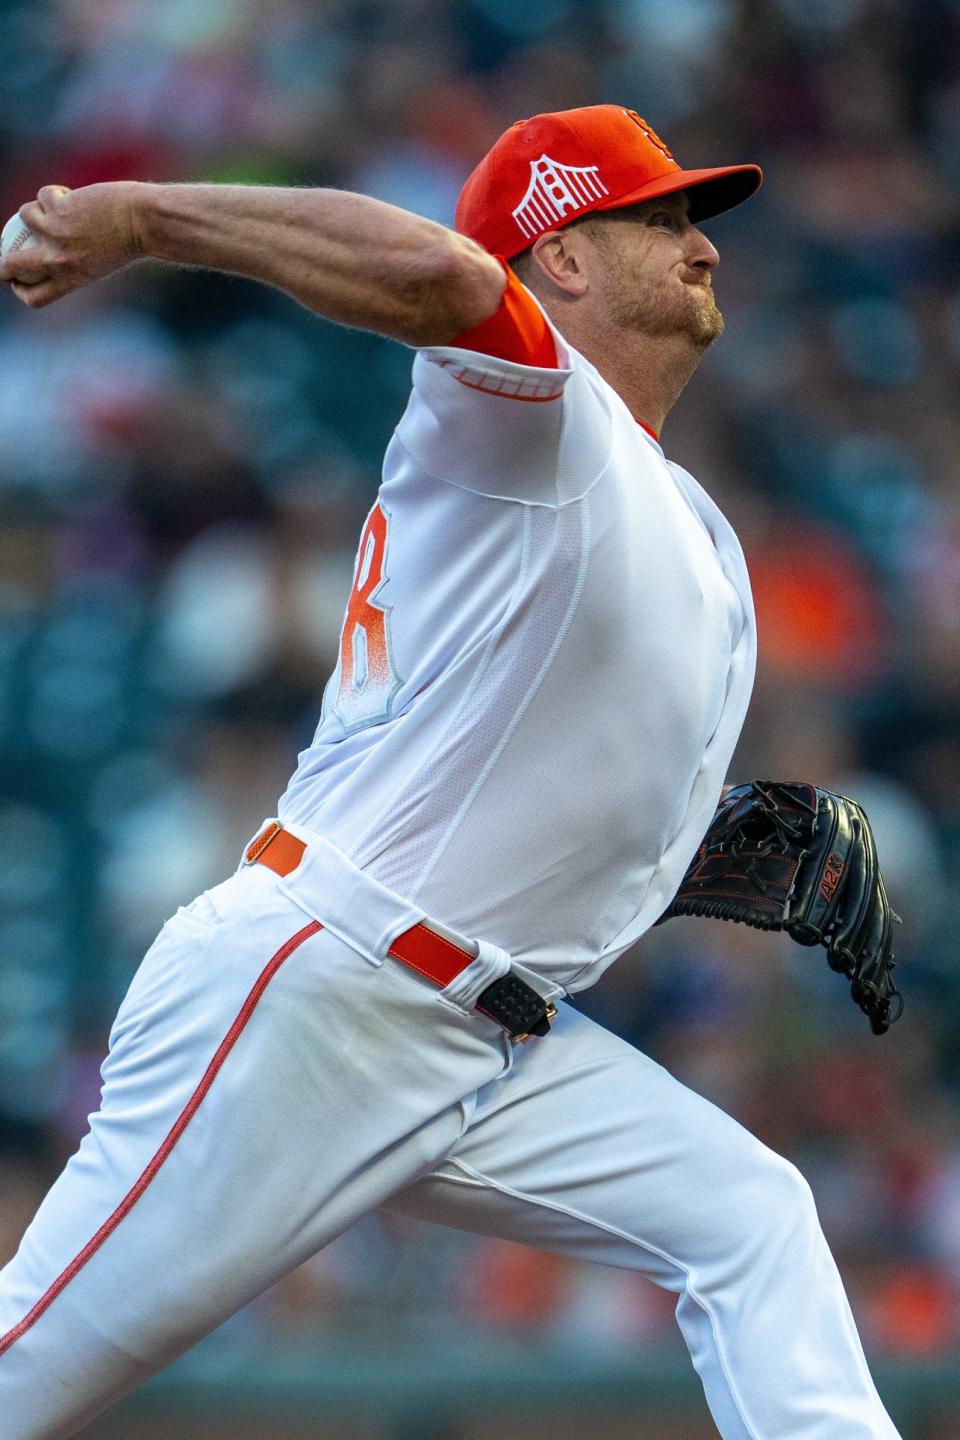 Giants starter Alex Cobb completely overwhelmed the Reds on Tuesday night until Spencer Steer broke up a no-hitter with two outs in the ninth. Steer doubled into the riht-field gap, driving in Nick Senzel, who had walked.